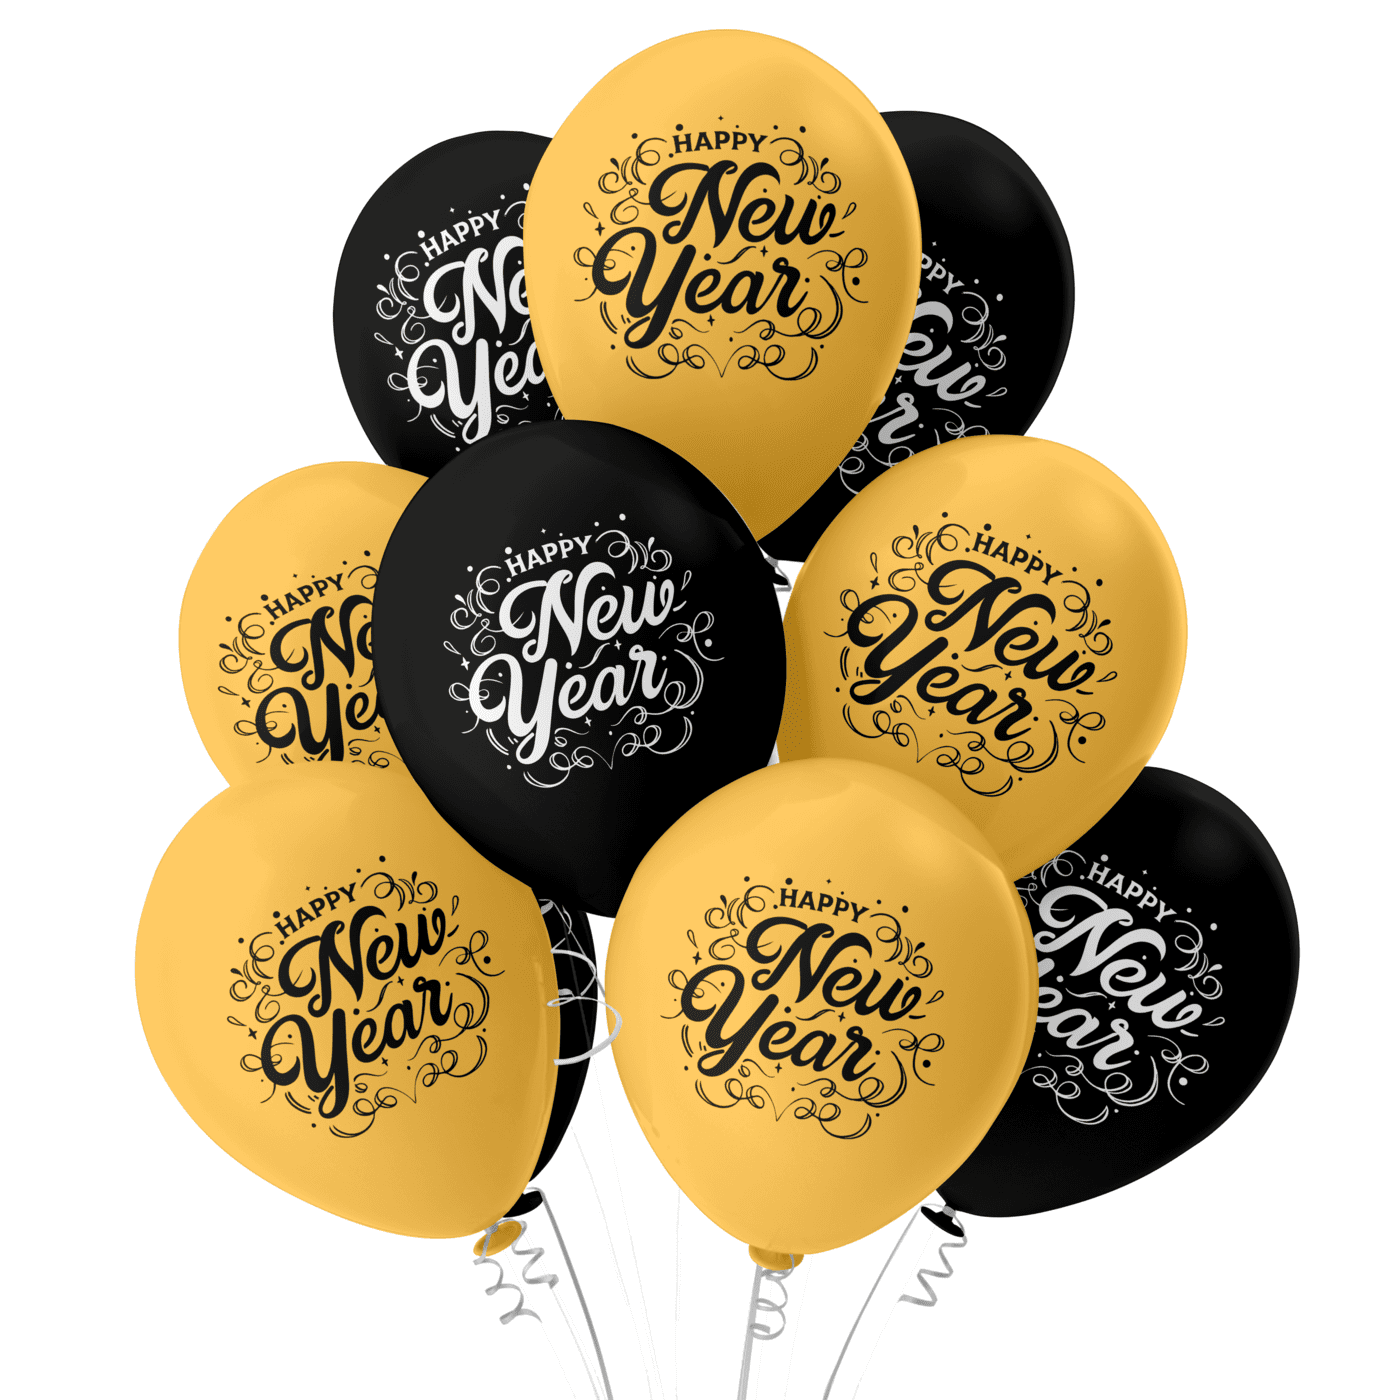 The Magic Balloons -Customized Happy New Year Latex Balloons New Year balloons  Pack of 30pcs Black and Golden Balloons For New Year's Eve.